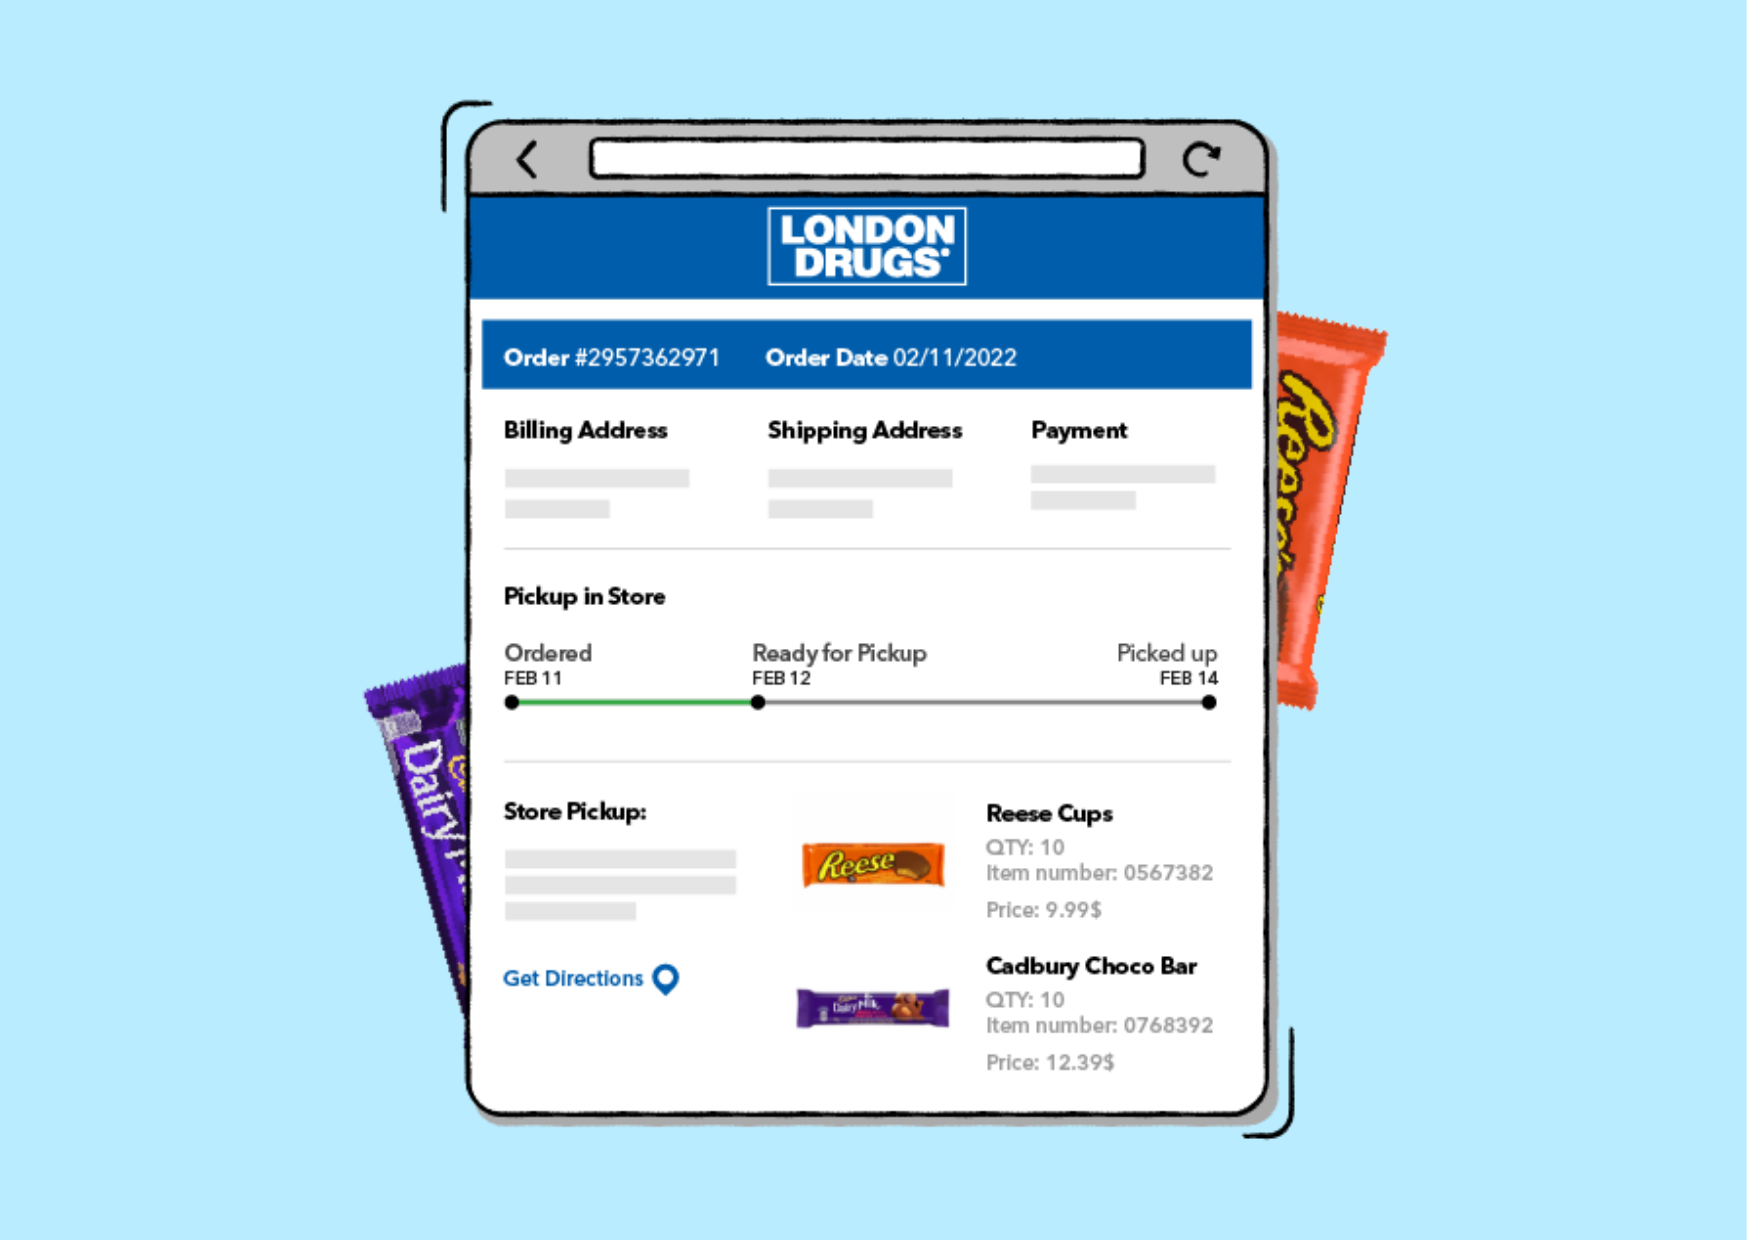 London Drugs: Managing Customer Experiences in an Omnichannel World